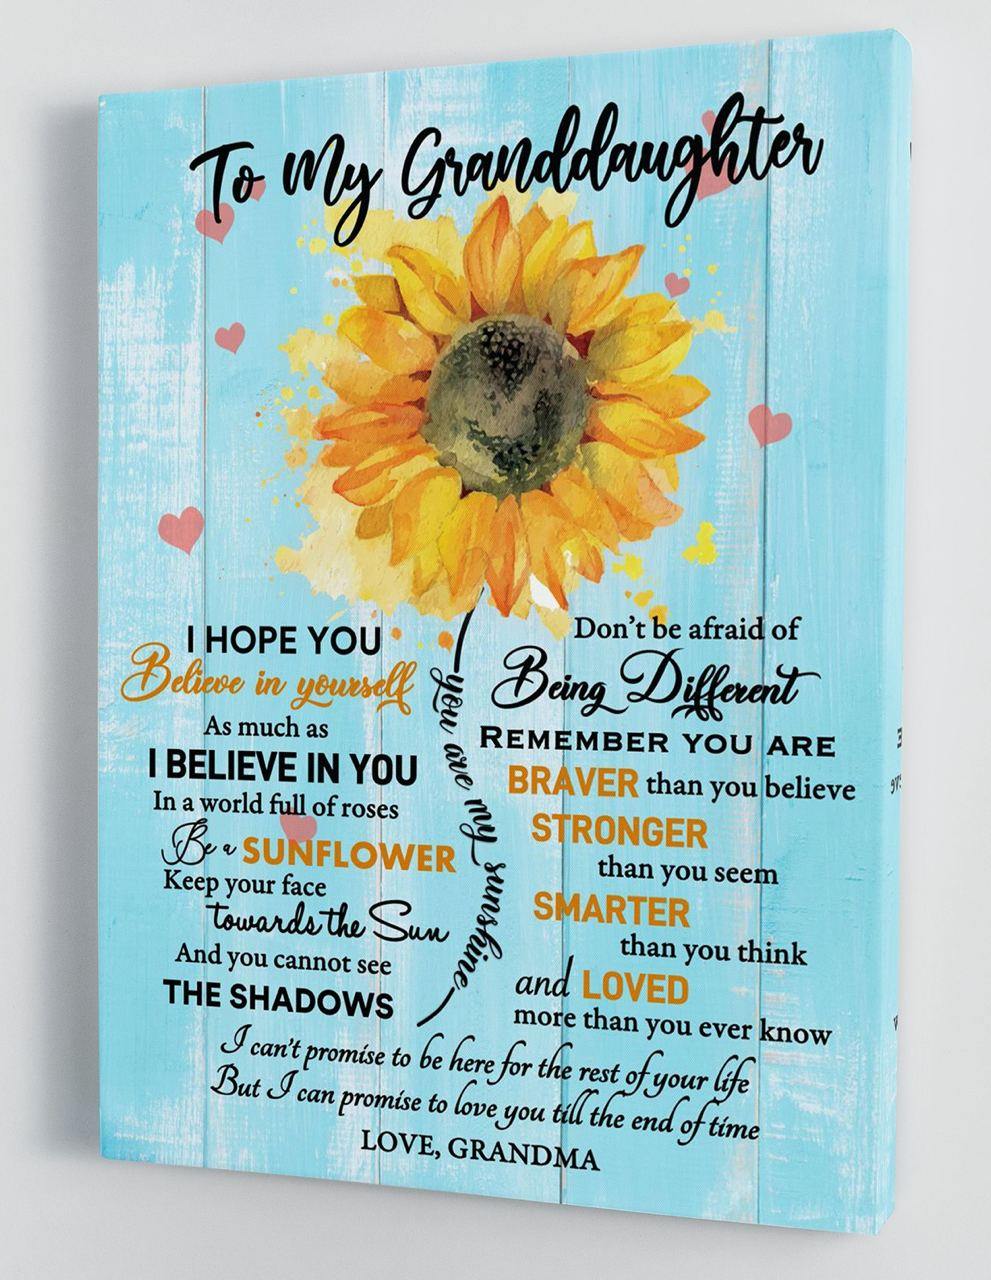 To My Granddaughter - From Grandma - Hard Time Framed Canvas Gift GMD065 - DivesArt LLC